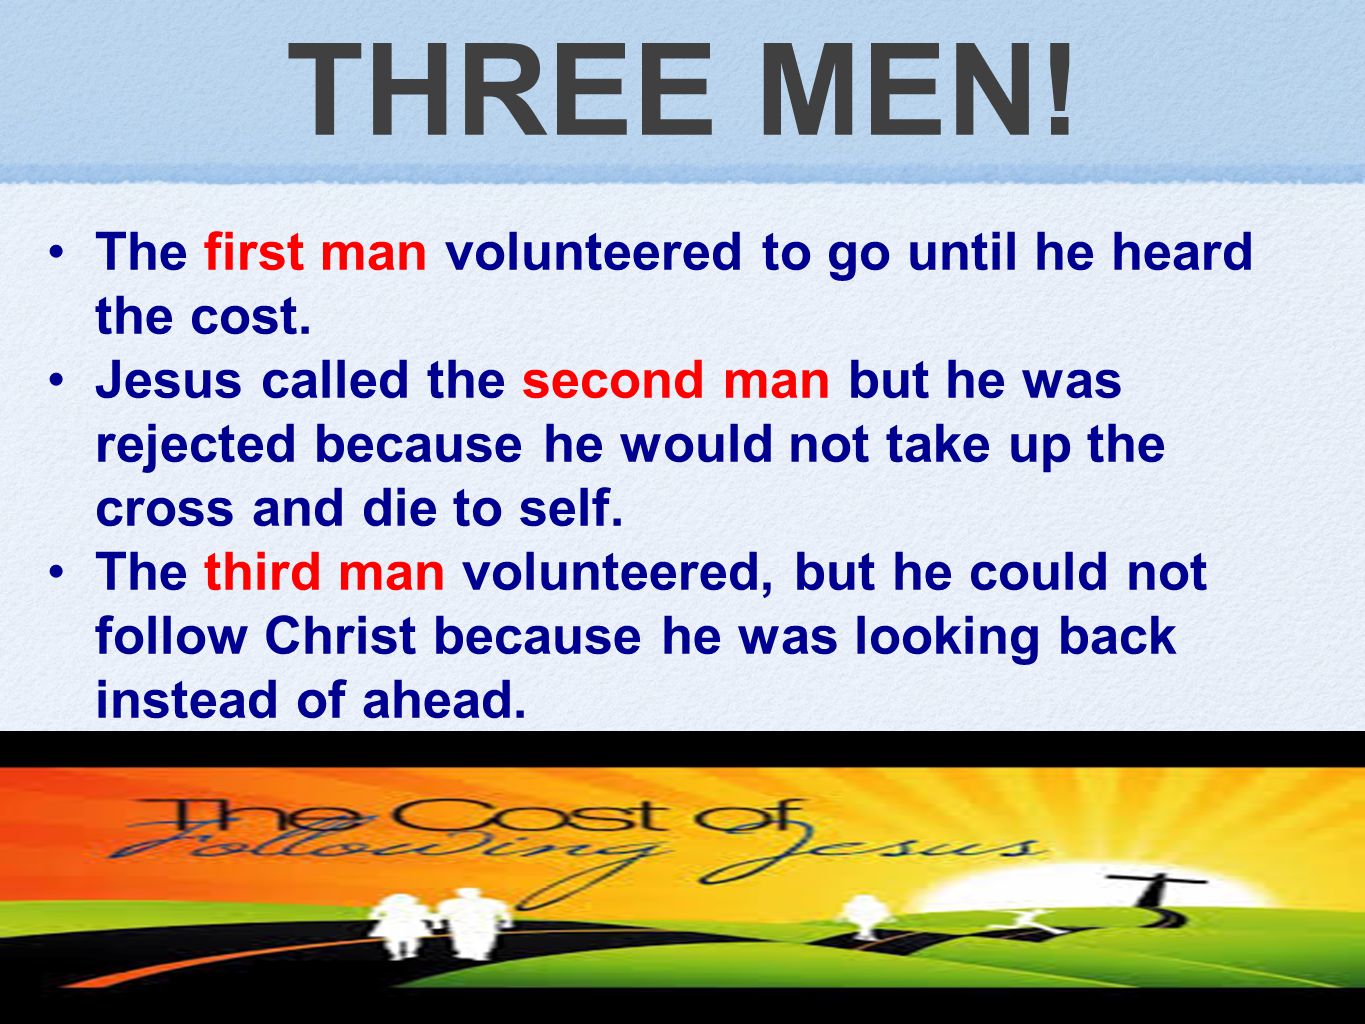 THREE MEN. The first man volunteered to go until he heard the cost.